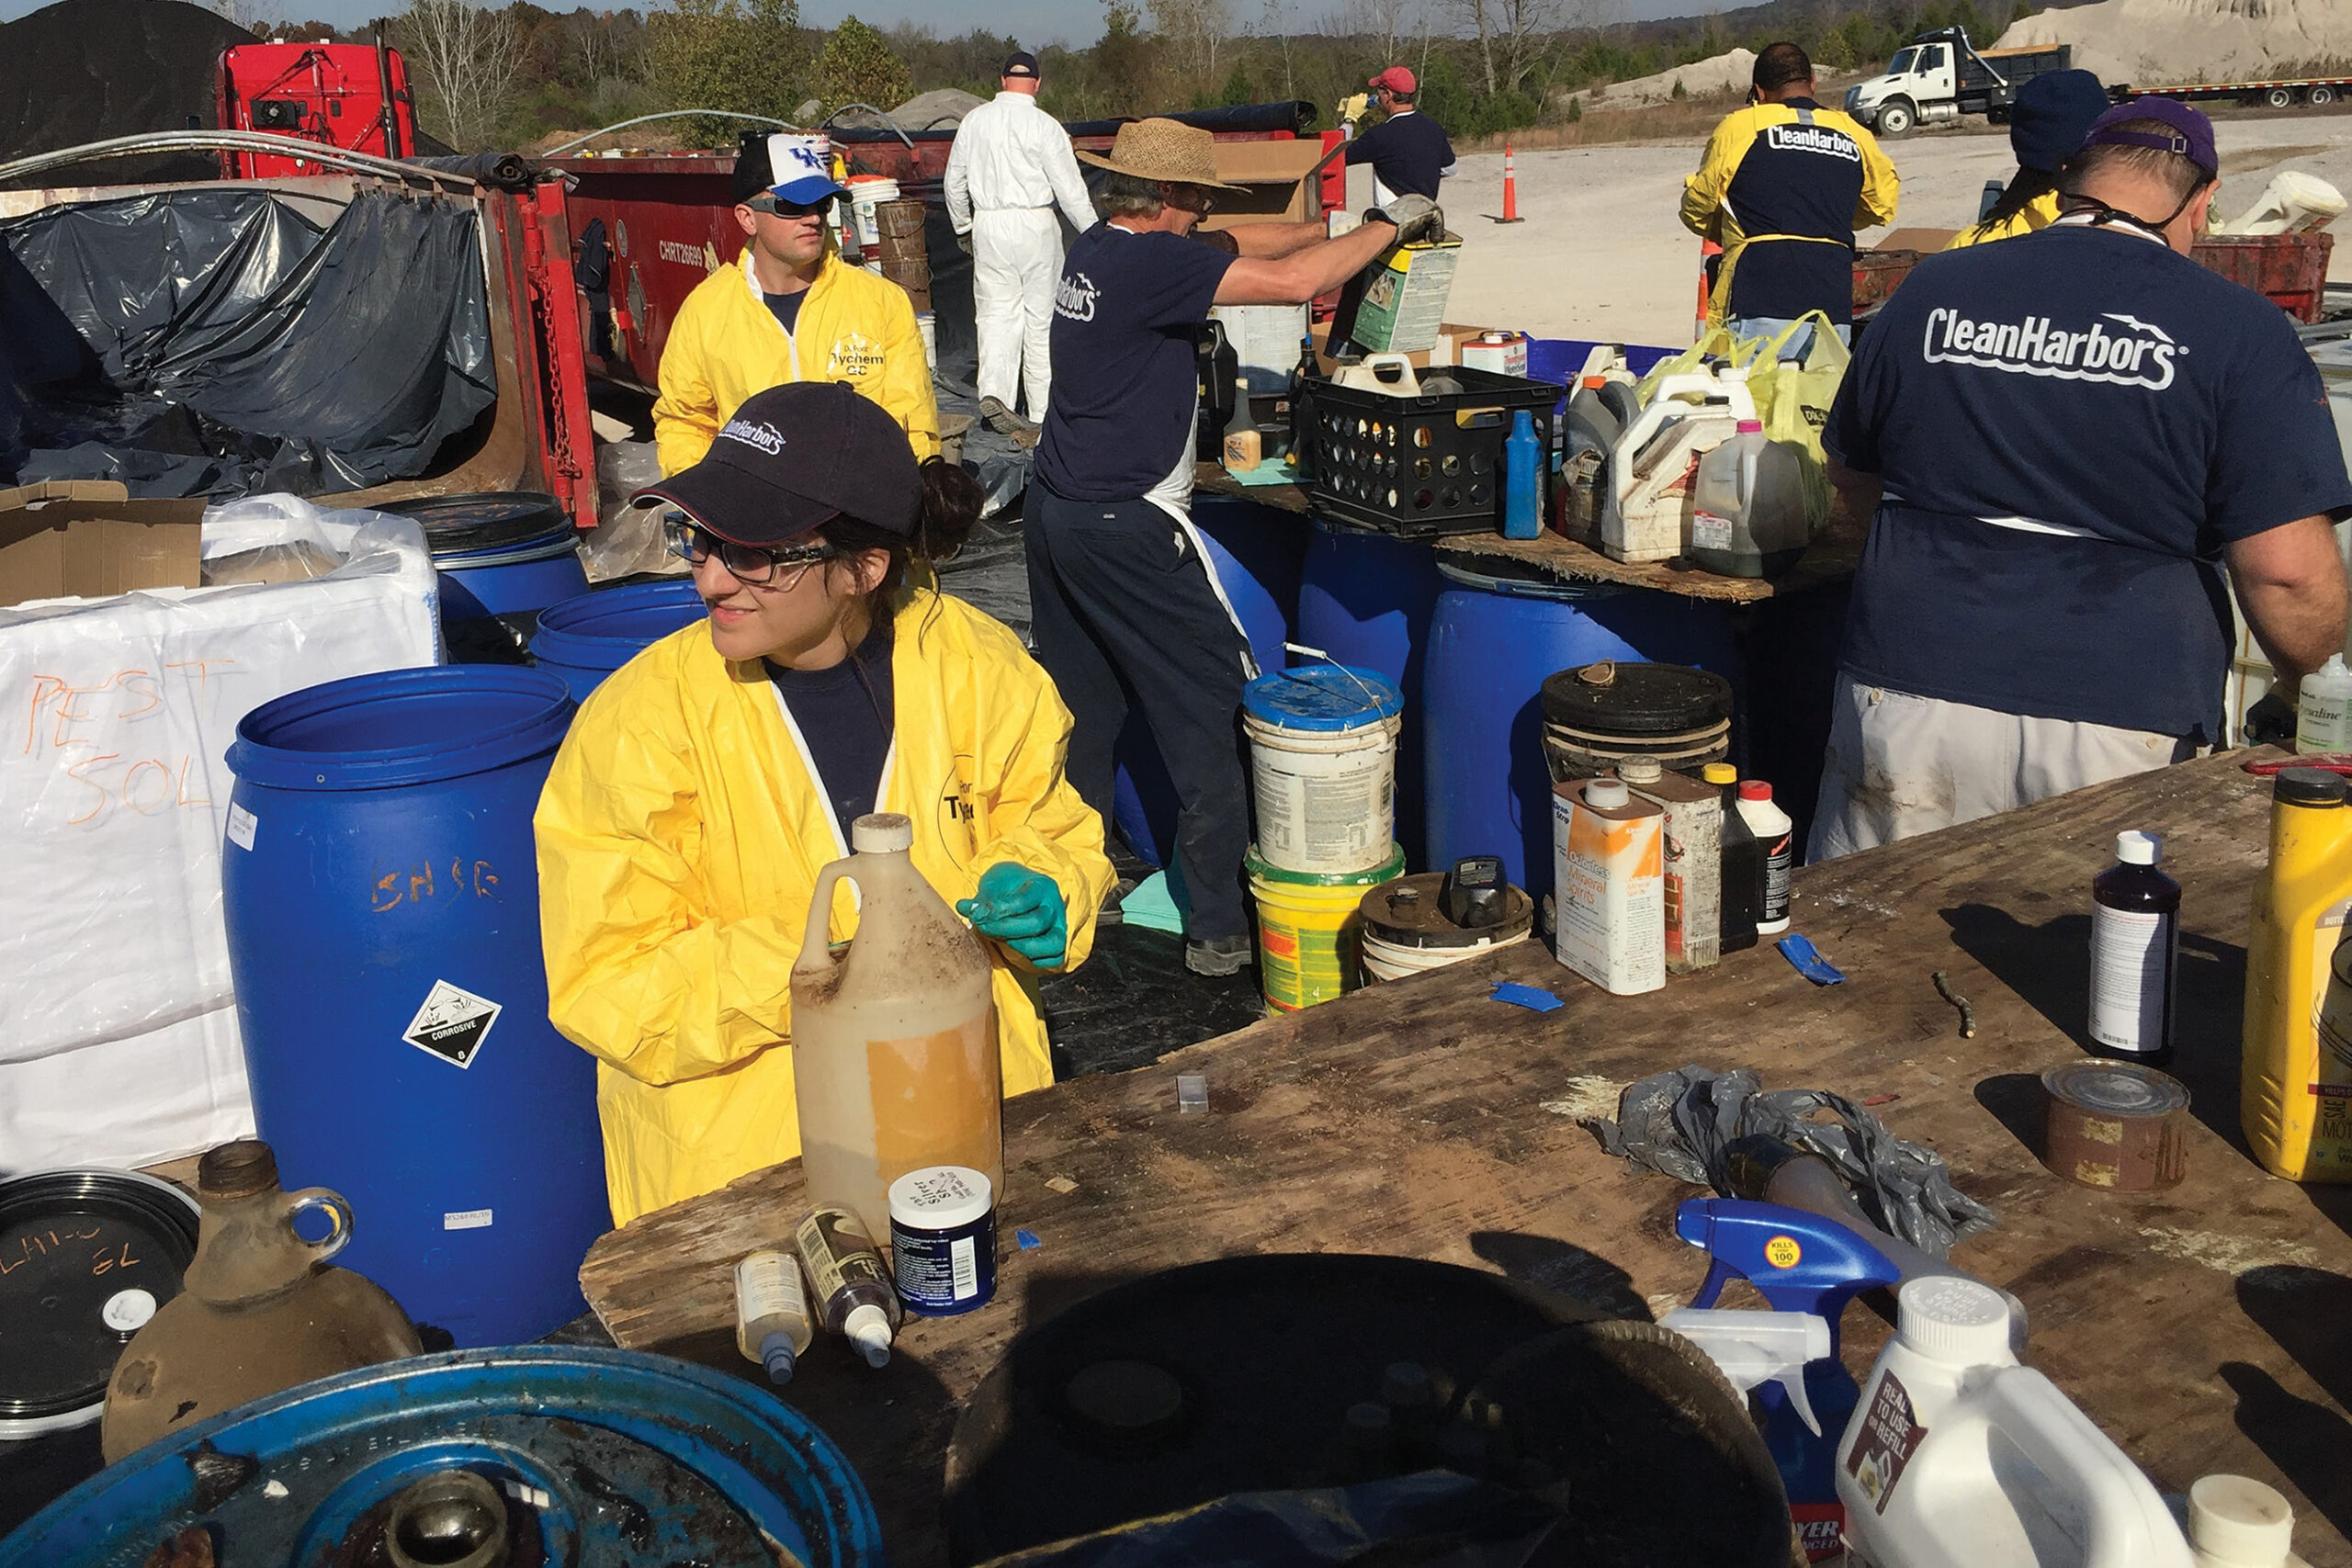 Household Hazardous Waste Day is Saturday, March 25 at the Warren